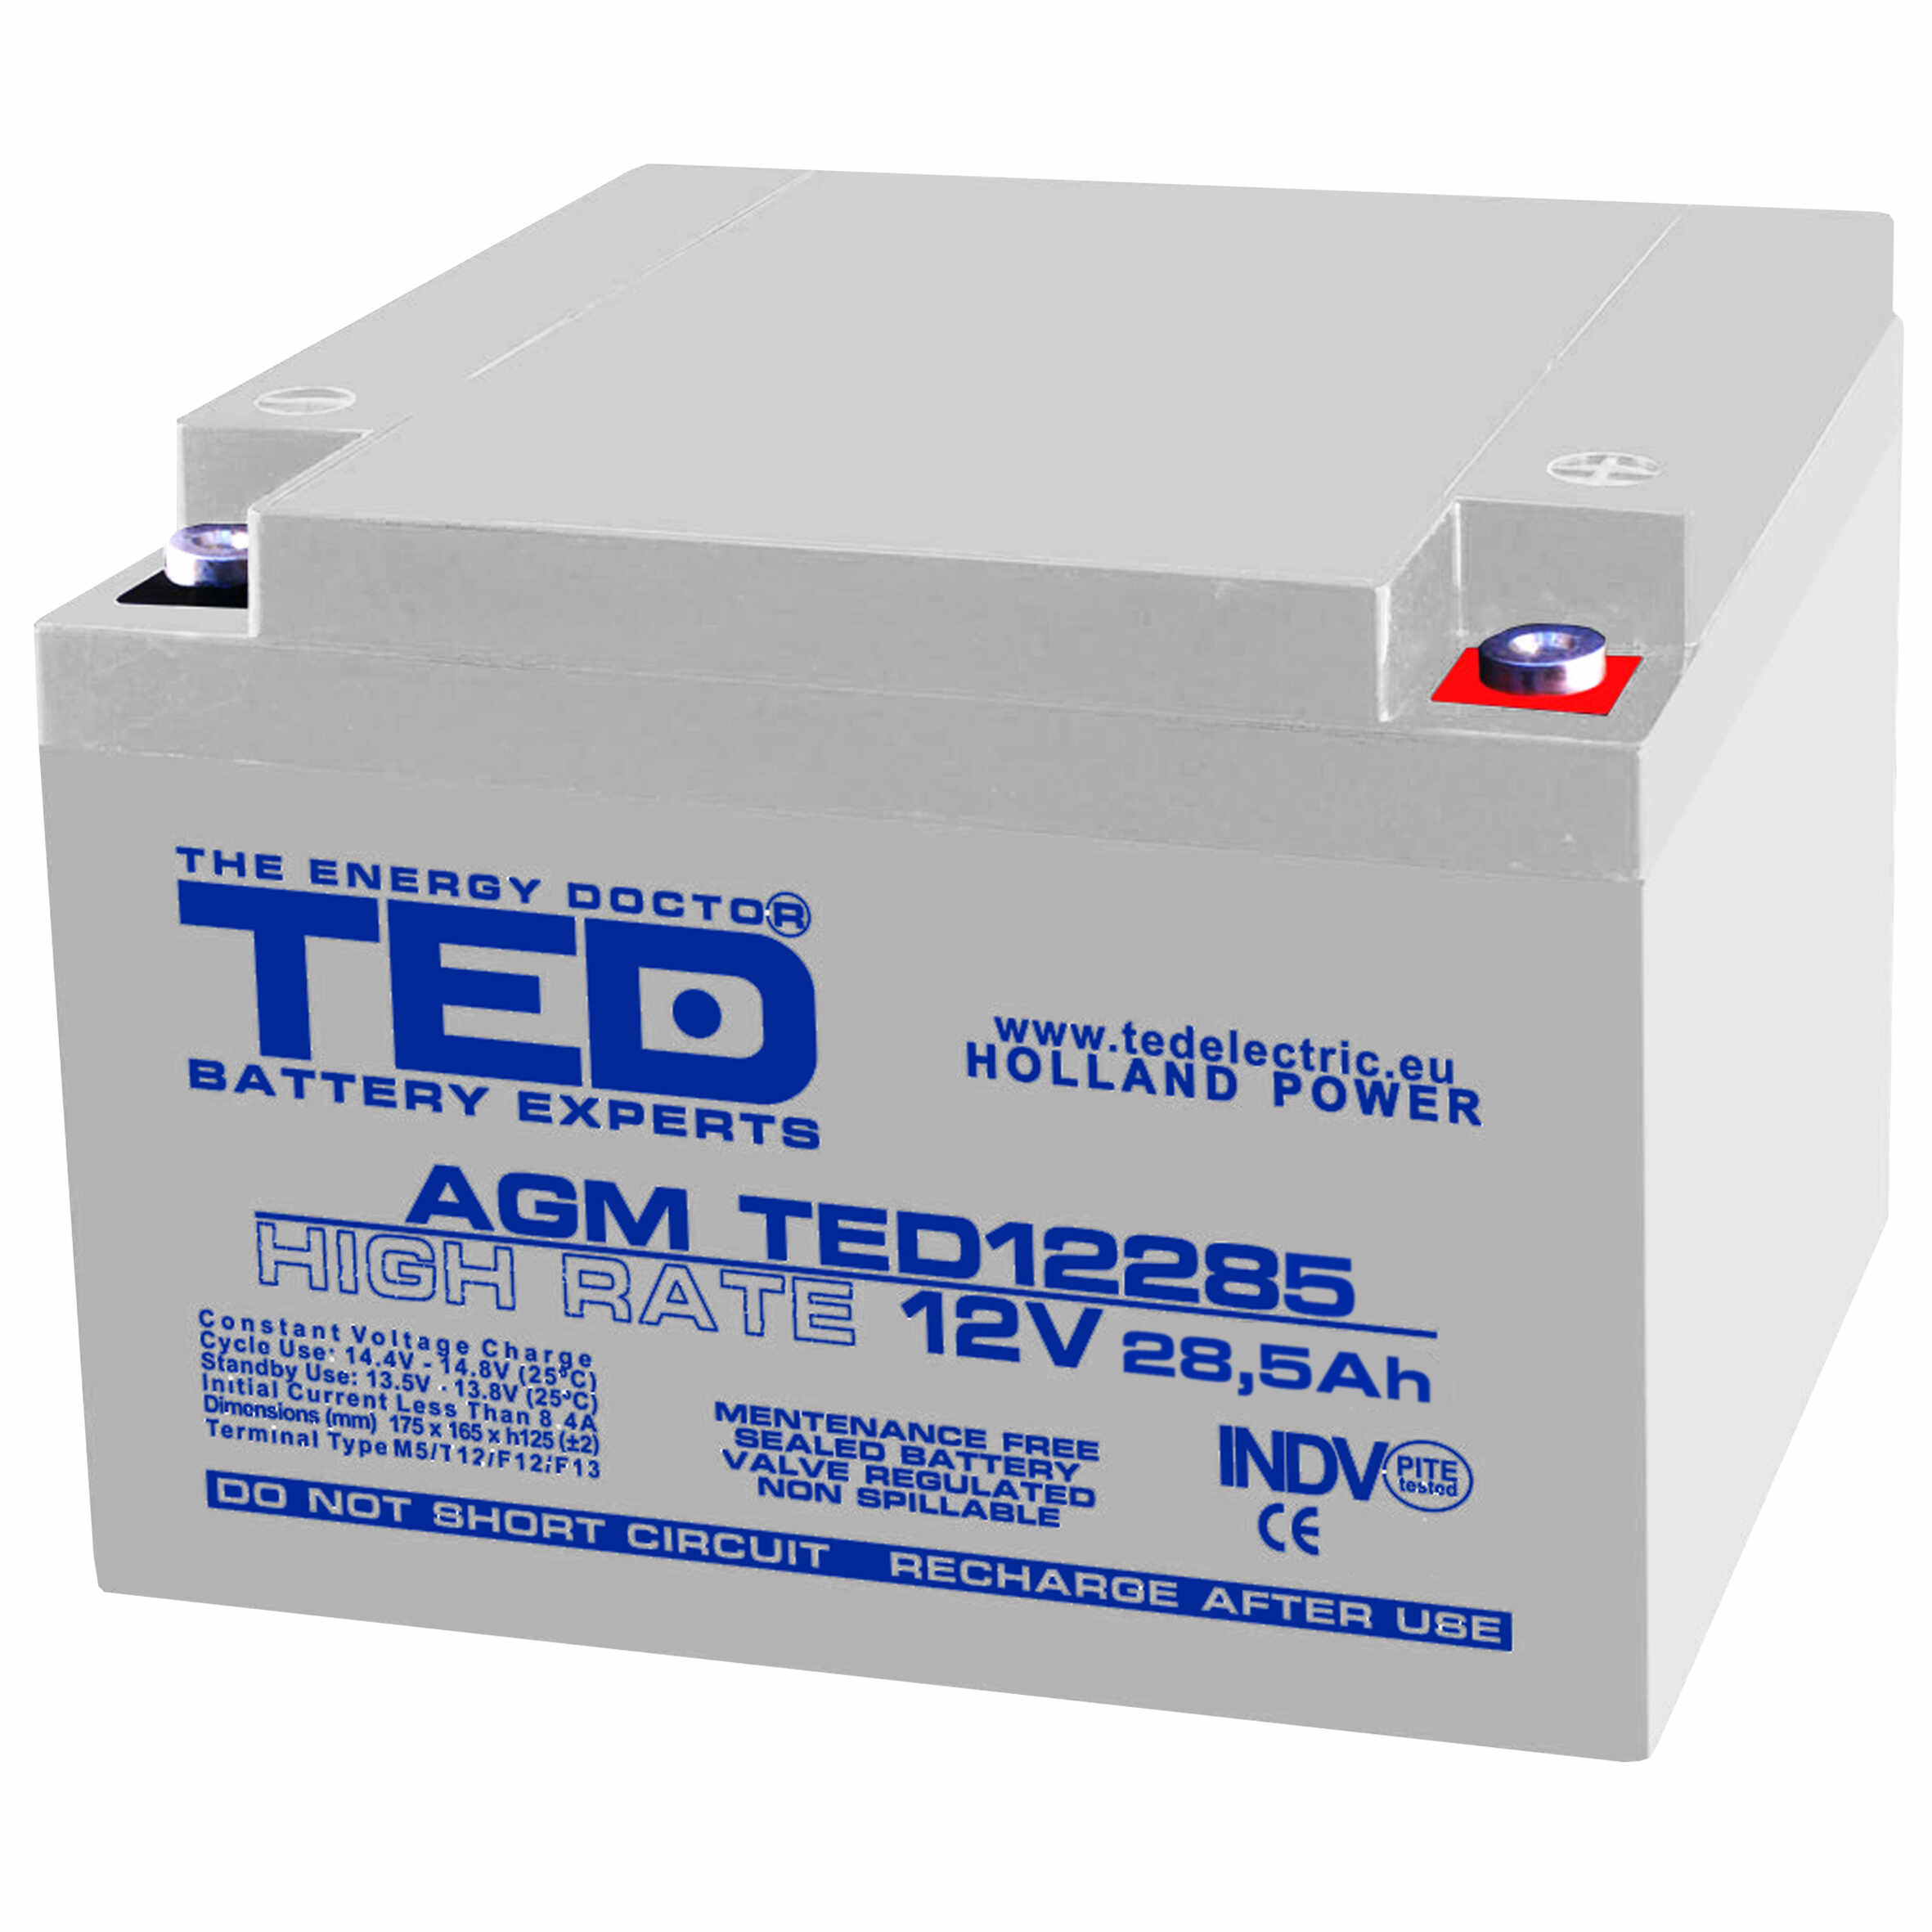 Acumulator AGM VRLA 12V 28,5A High Rate 165mm x 175mm x h 126mm mm M5 TED Battery Expert Holland TED003447 (1)